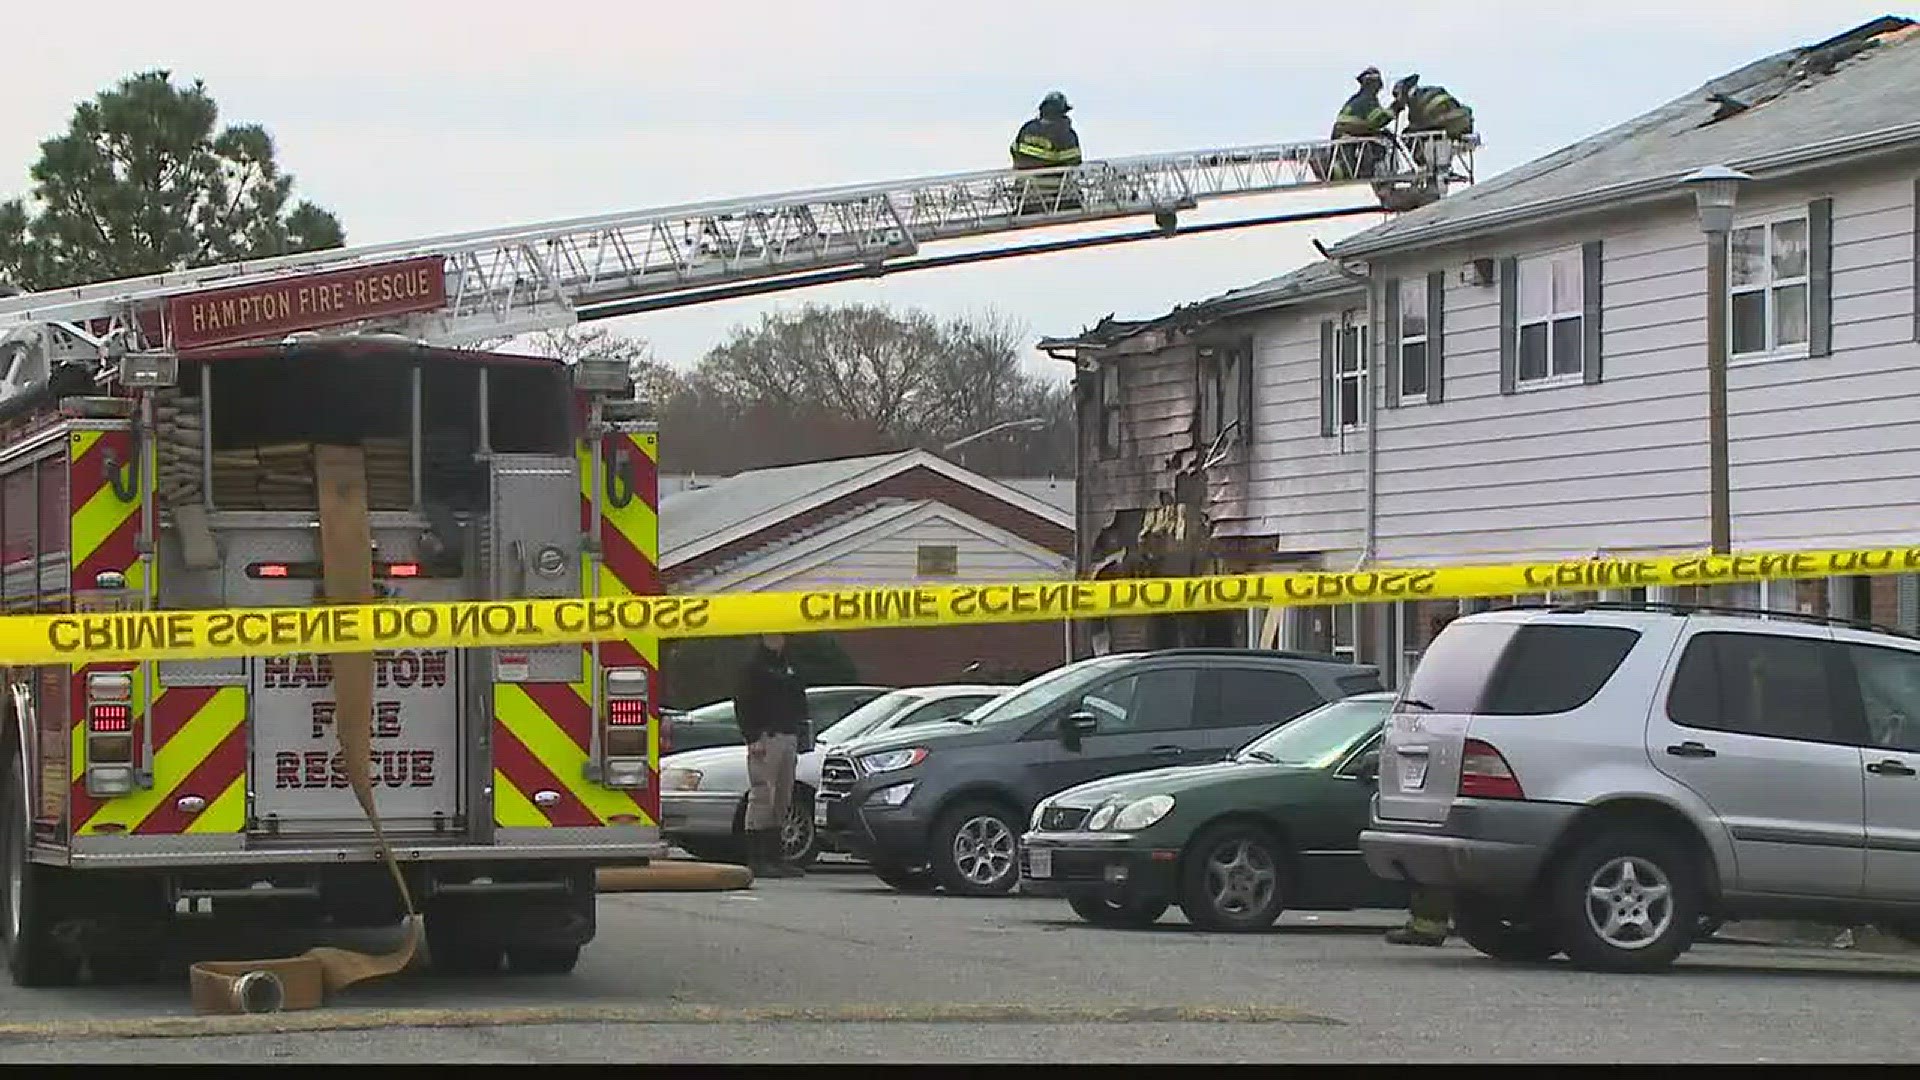 20 people displaced by 2-alarm fire at Hampton apartment complex